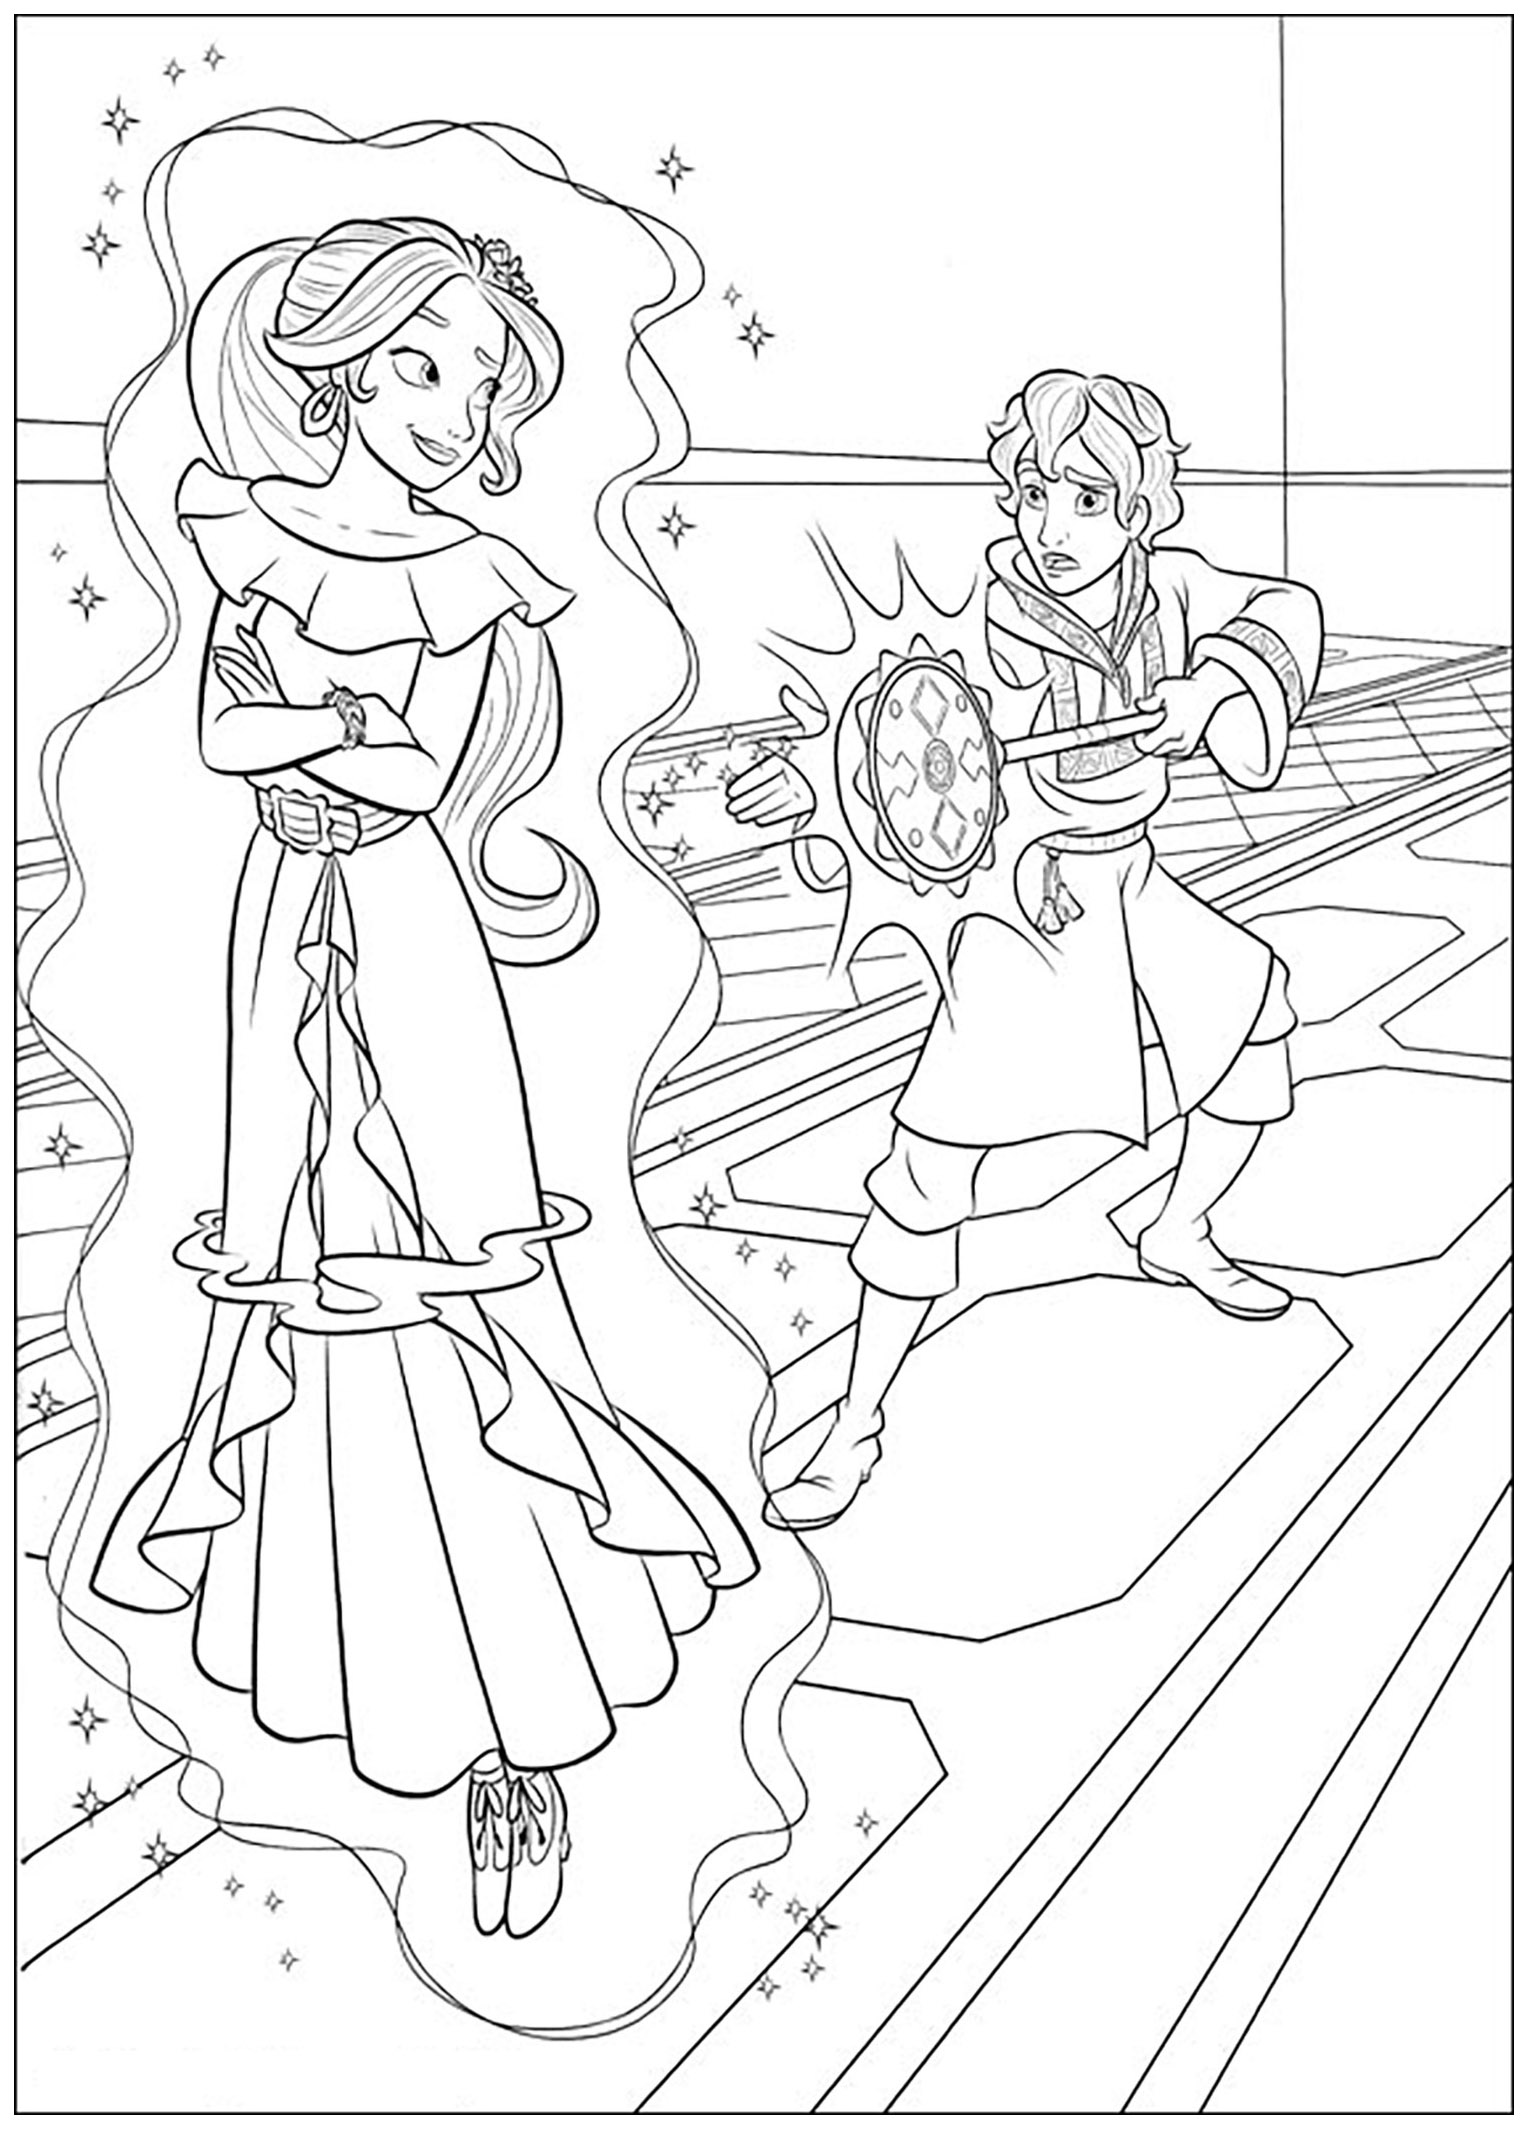 elena-avalor-to-print-for-free-elena-avalor-kids-coloring-pages